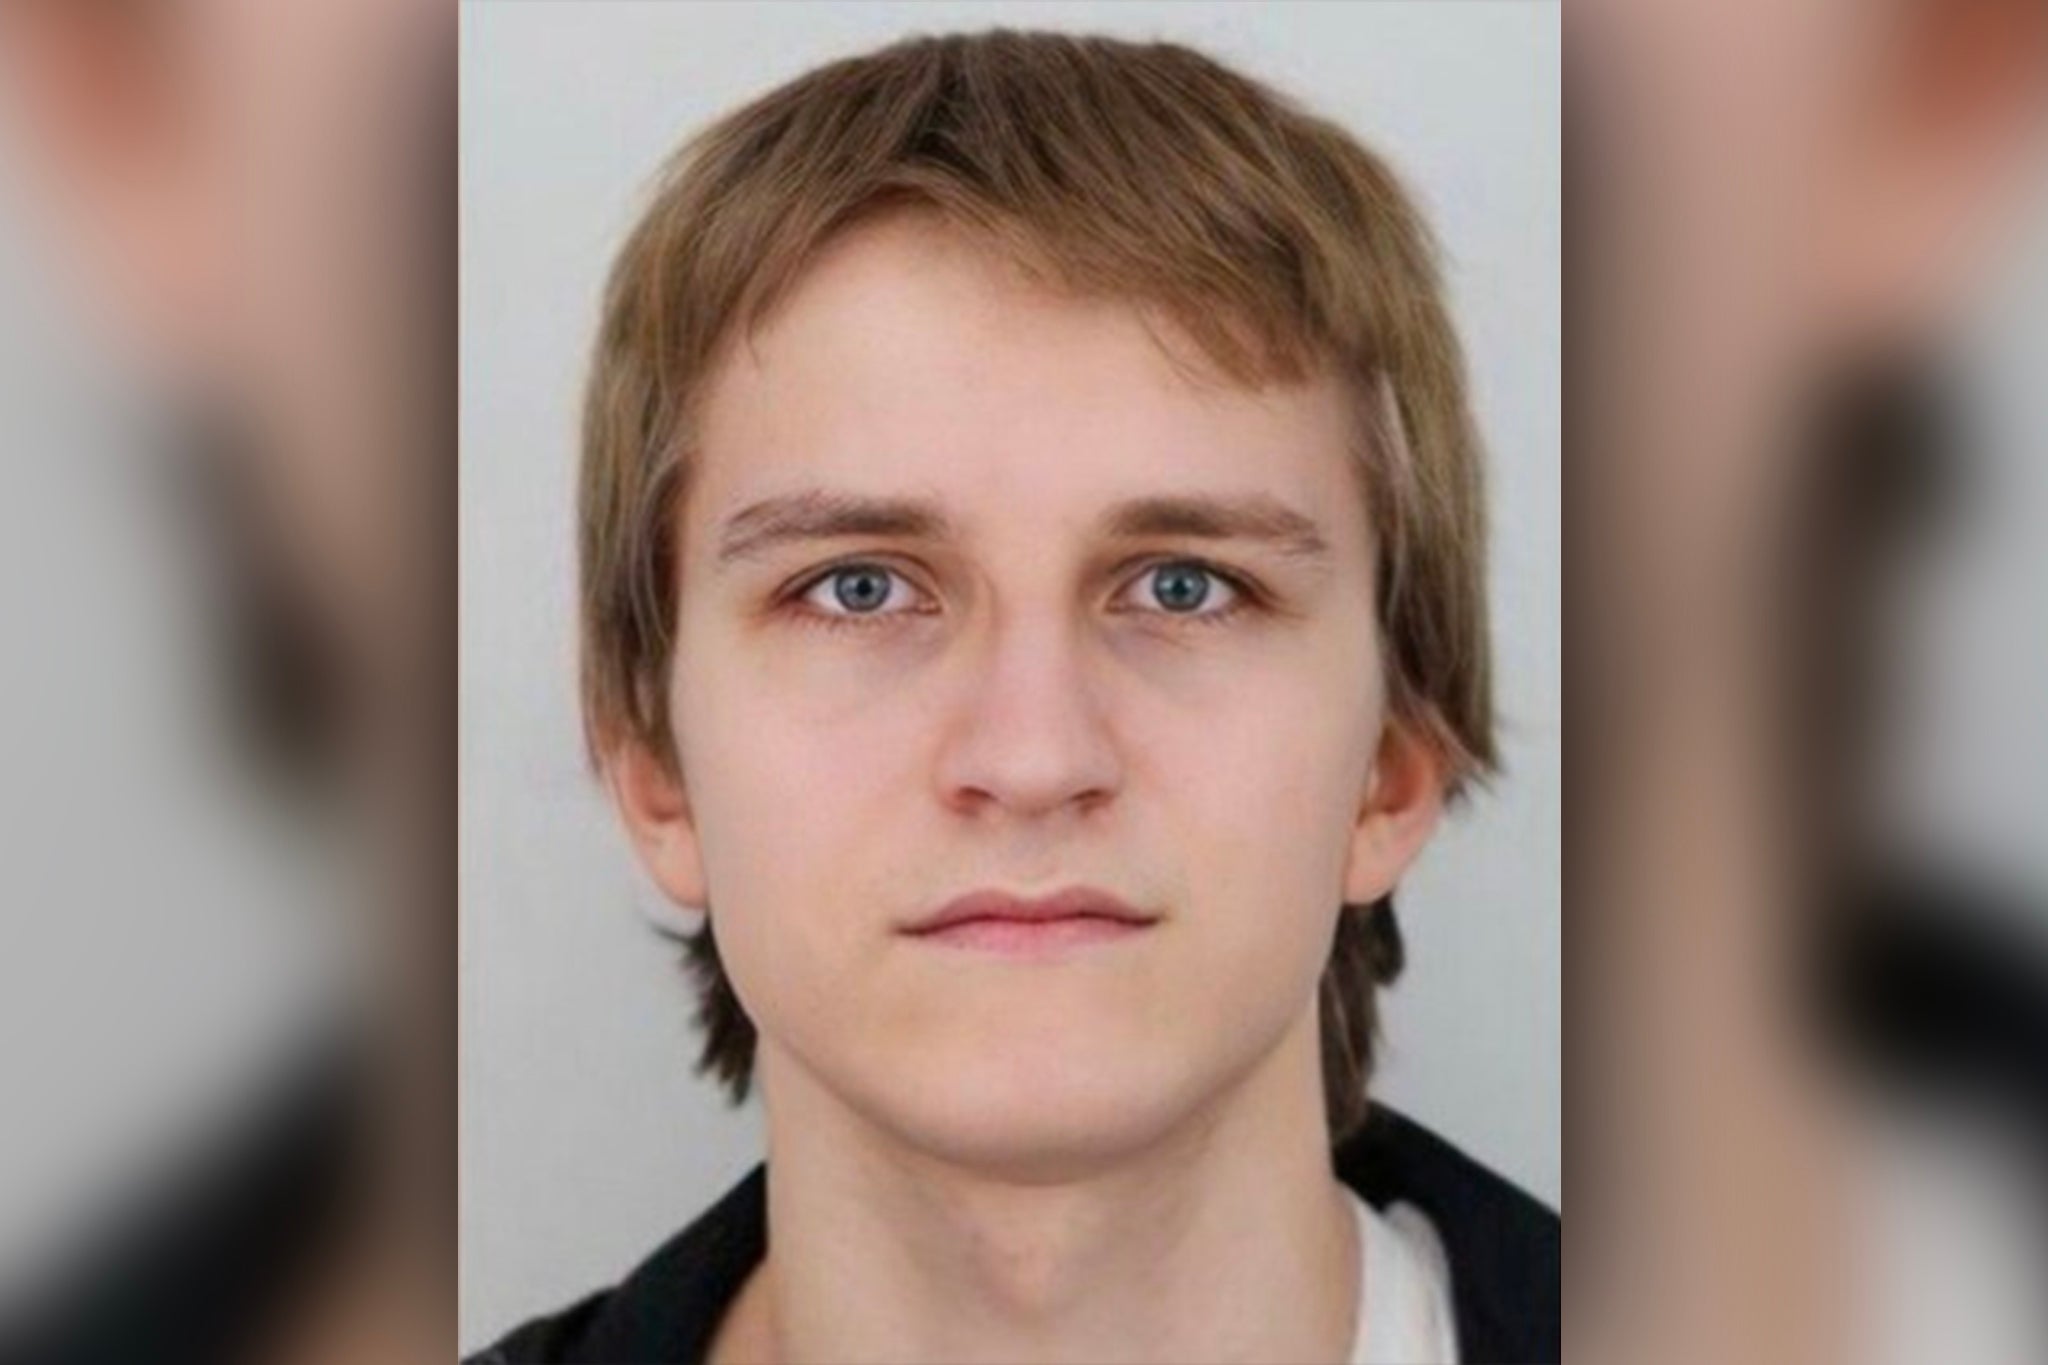 History student David Kozak, 24, opened fire on his peers and classmates at Charles University in central Prague on 21 December, killing at least 14 and injuring dozens of others